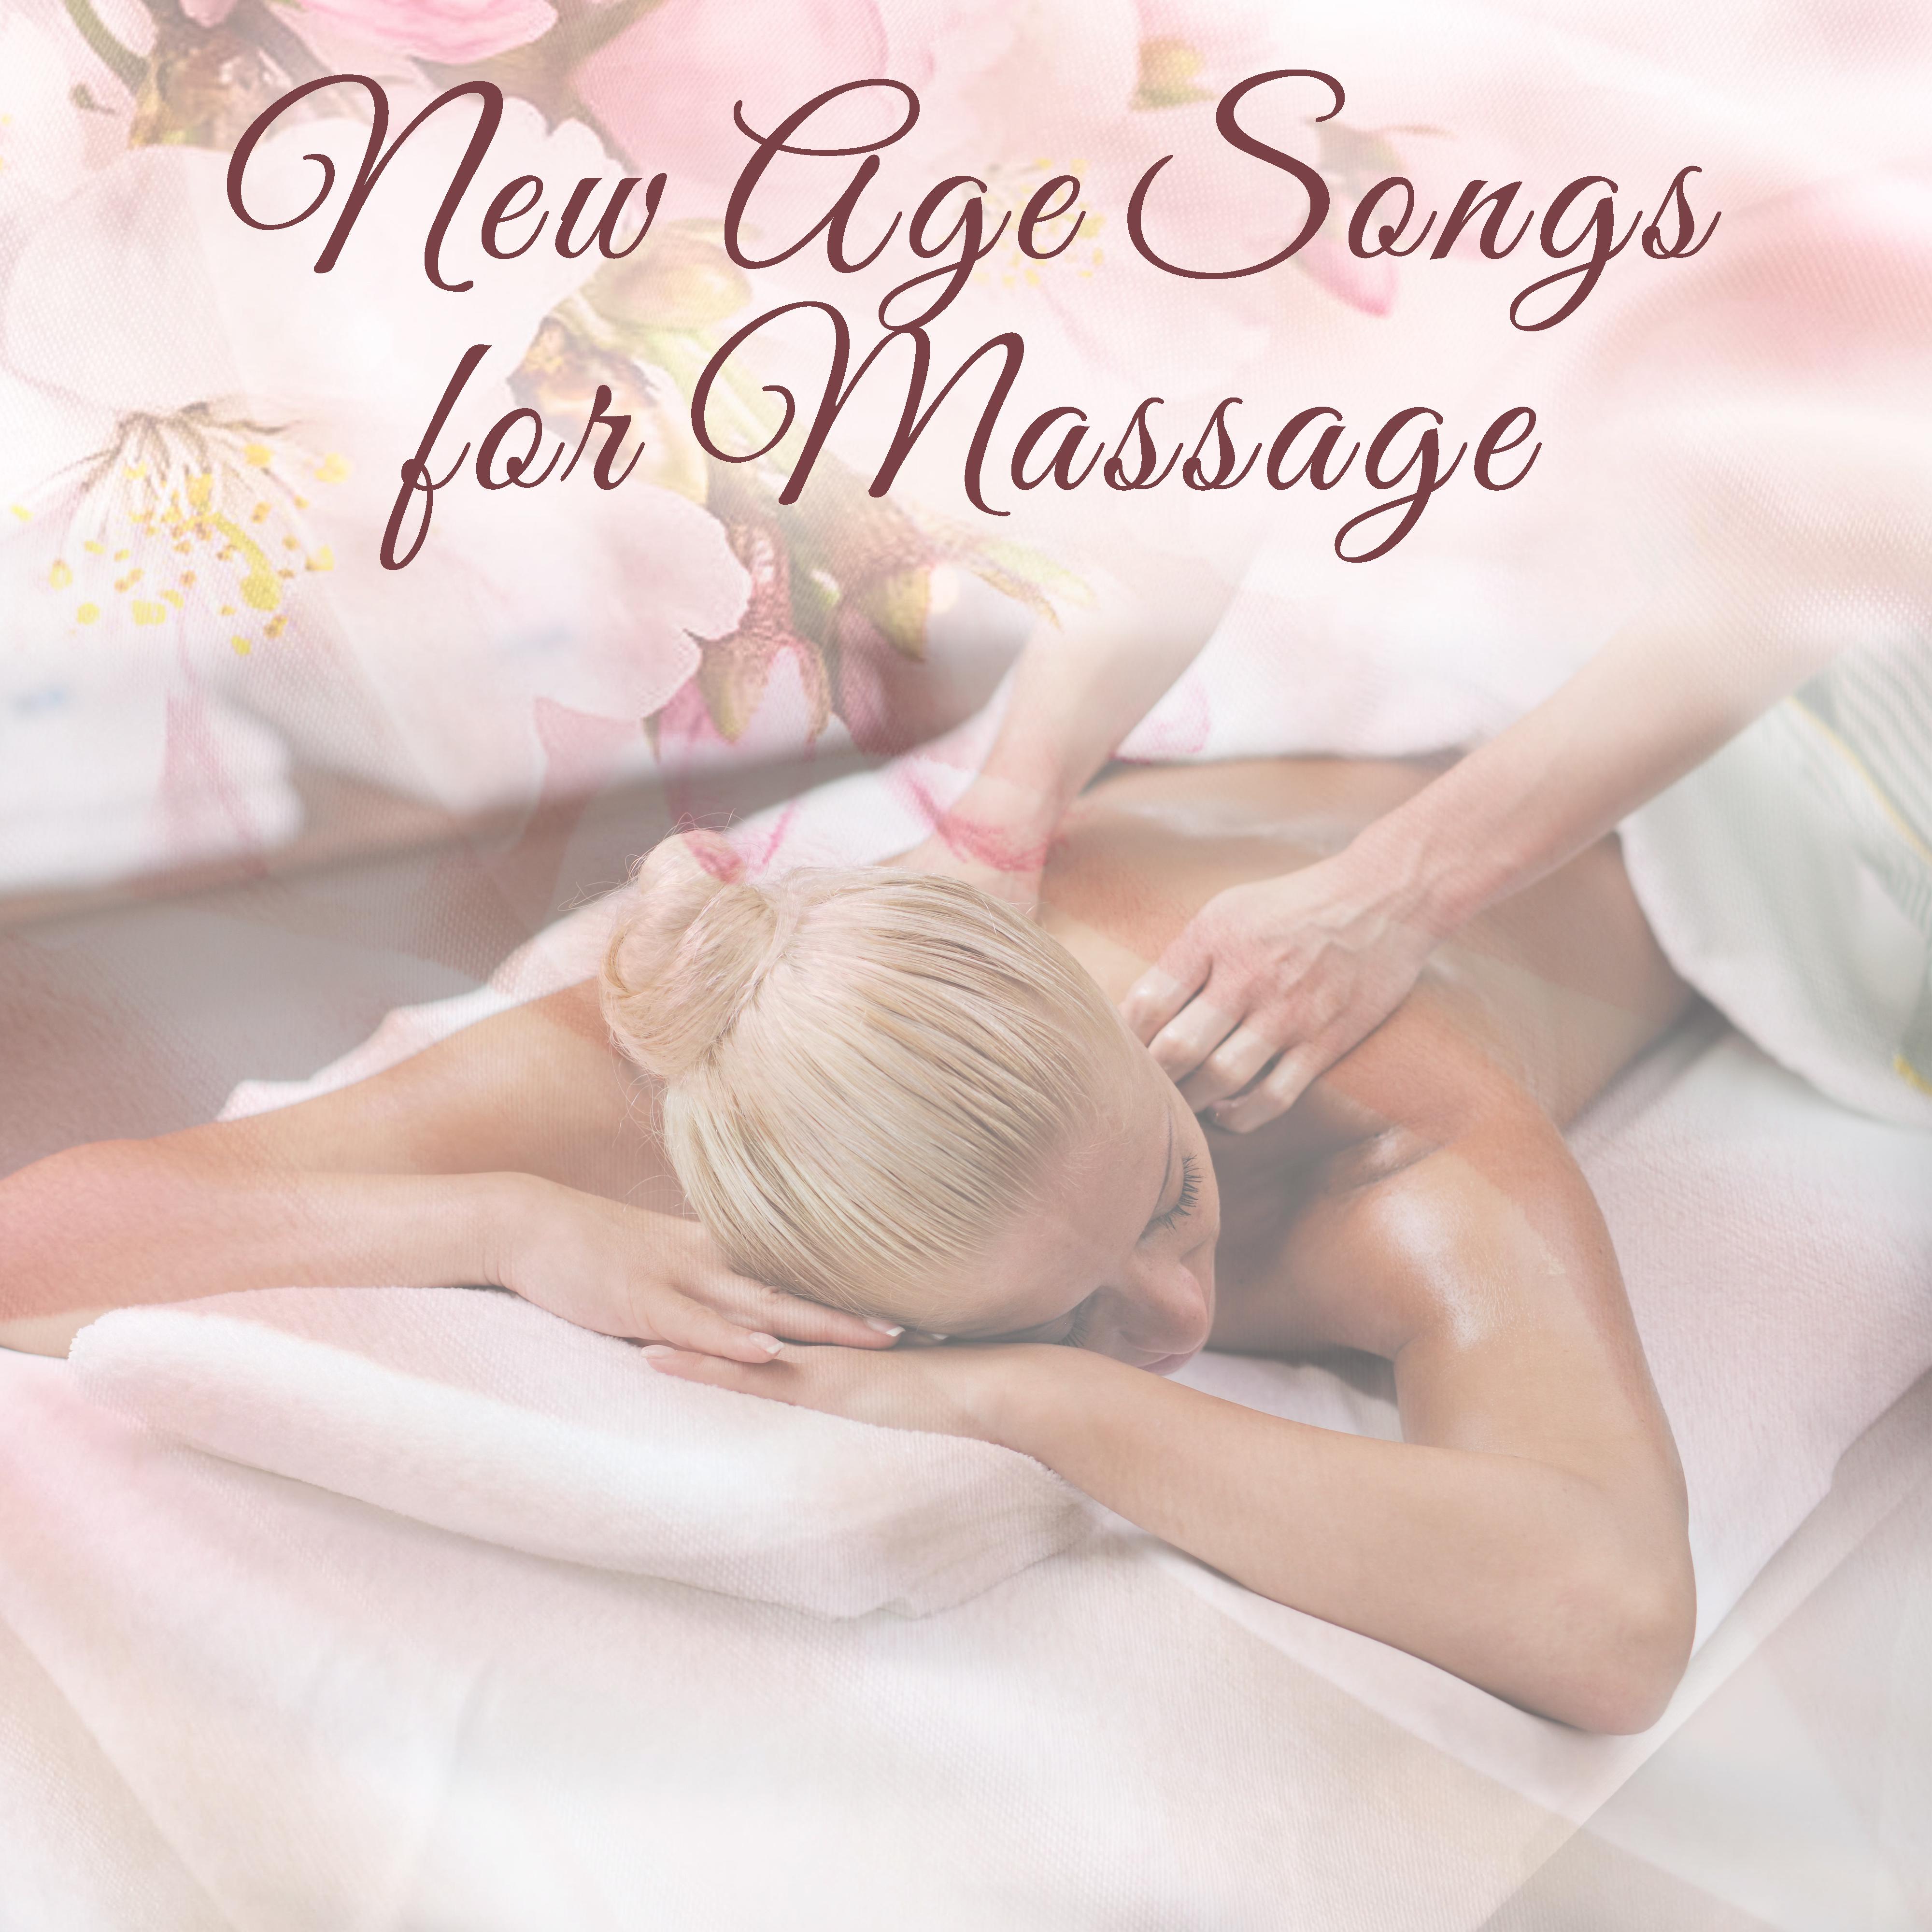 New Age Songs for Massage  Peaceful Music for Massage, Spa, Wellness, Nature Therapy Sounds